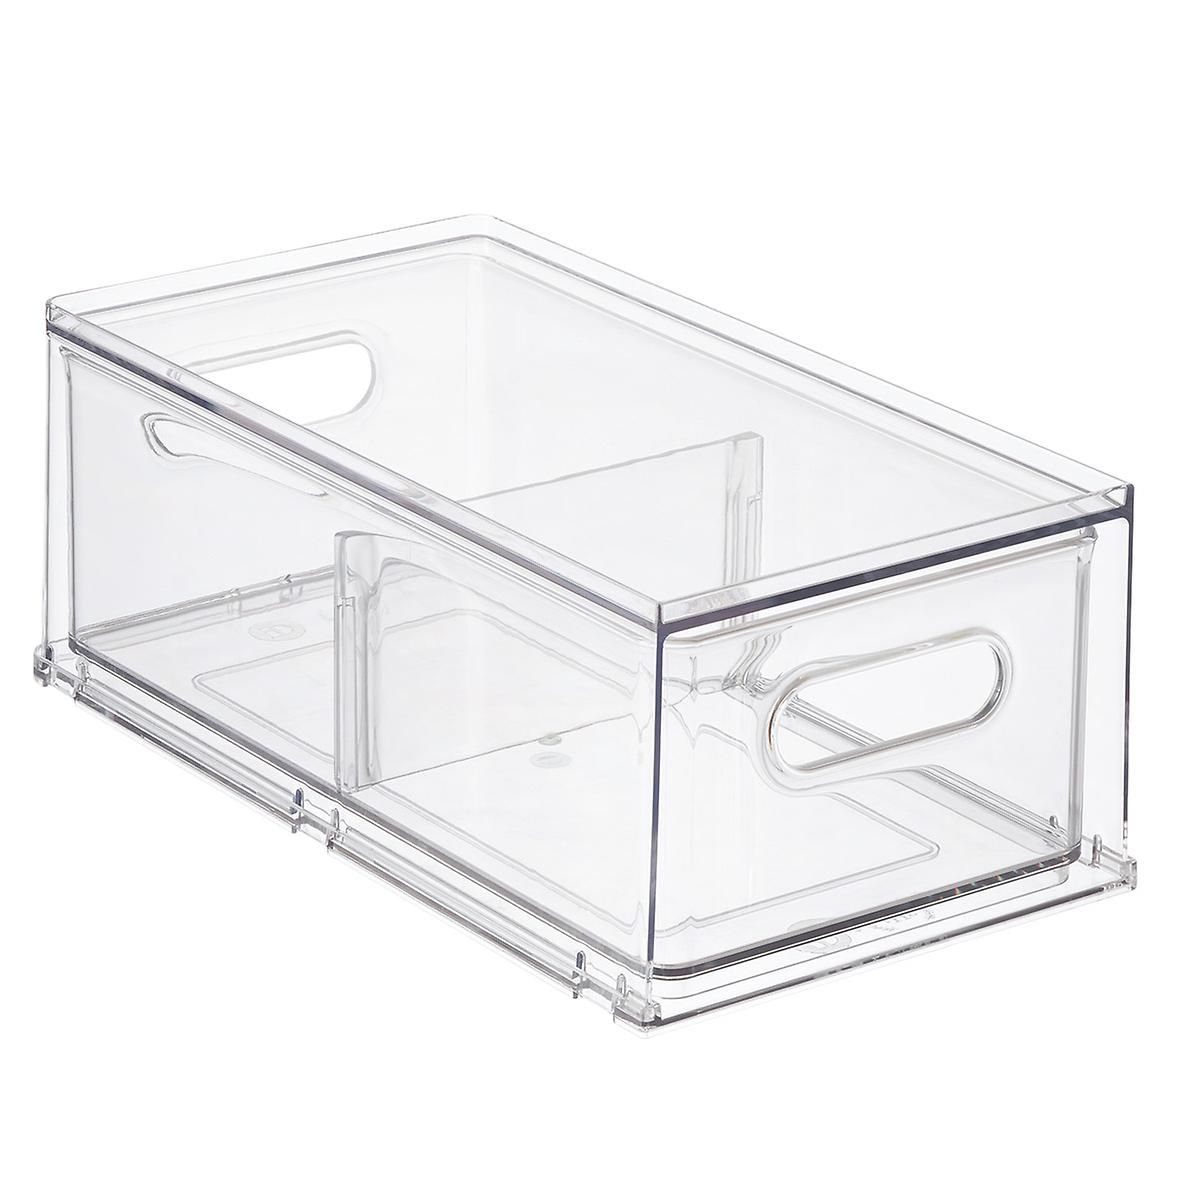 Case of 8 T.H.E. Divided Fridge Drawer | The Container Store